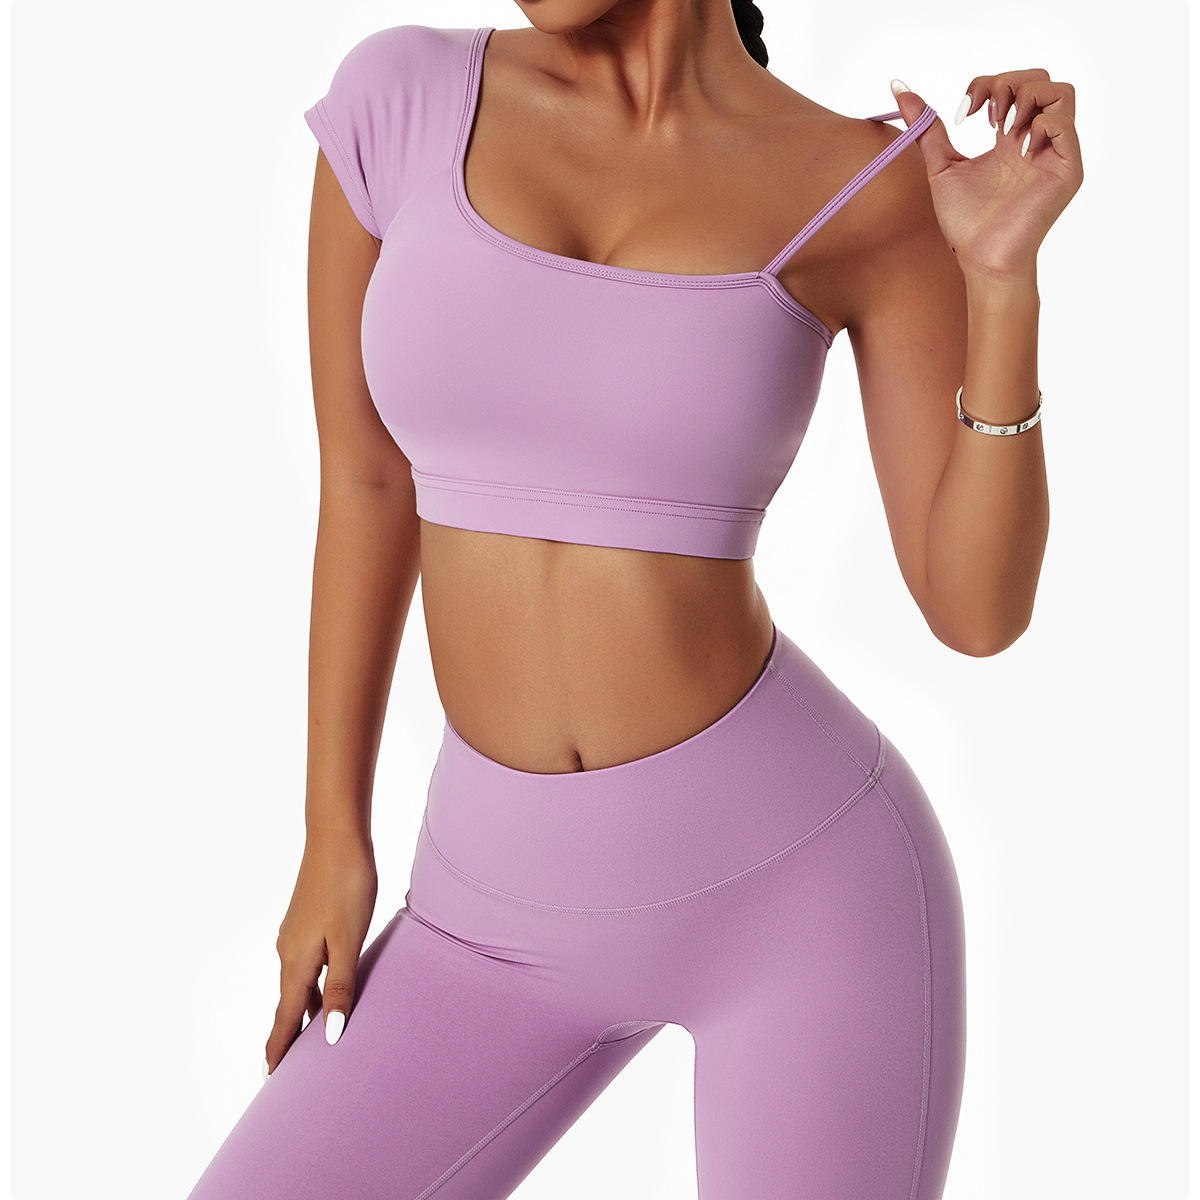 Fashion Sexy Outdoor Yoga Wear Diagonal Shoulder Leggings Running Naked Fitness Suit Tight Quick Drying Exercise Suit